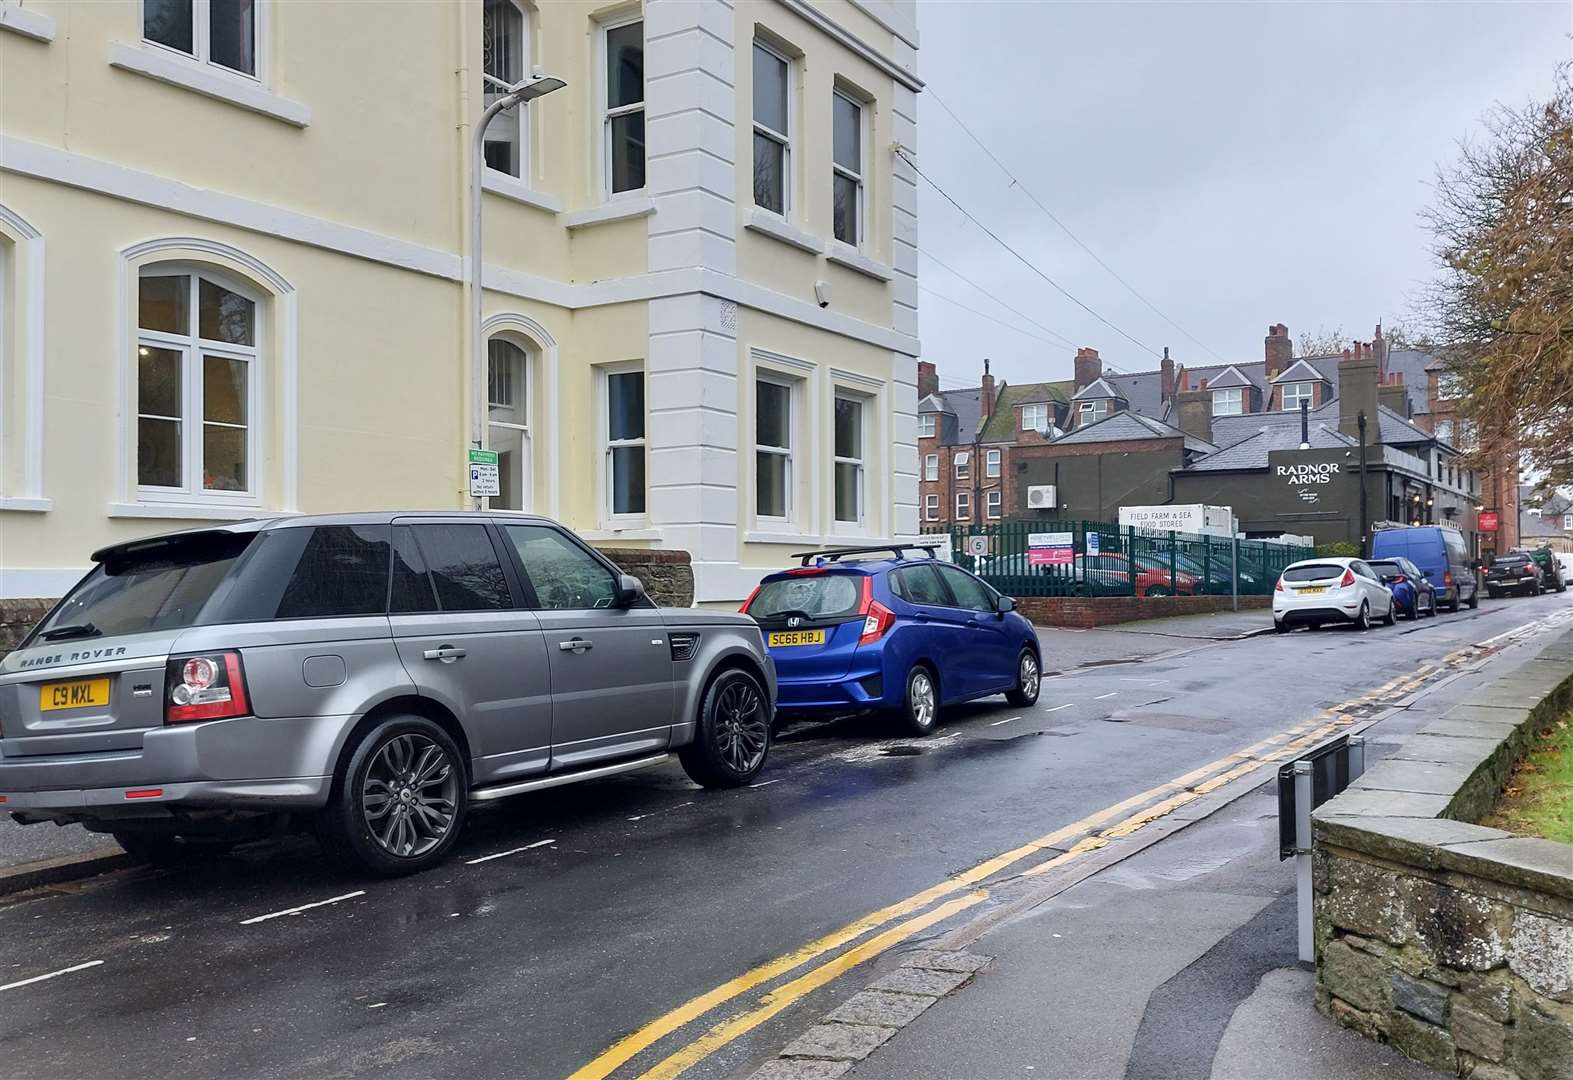 Christ Church Road in Folkestone could also lose its free spaces